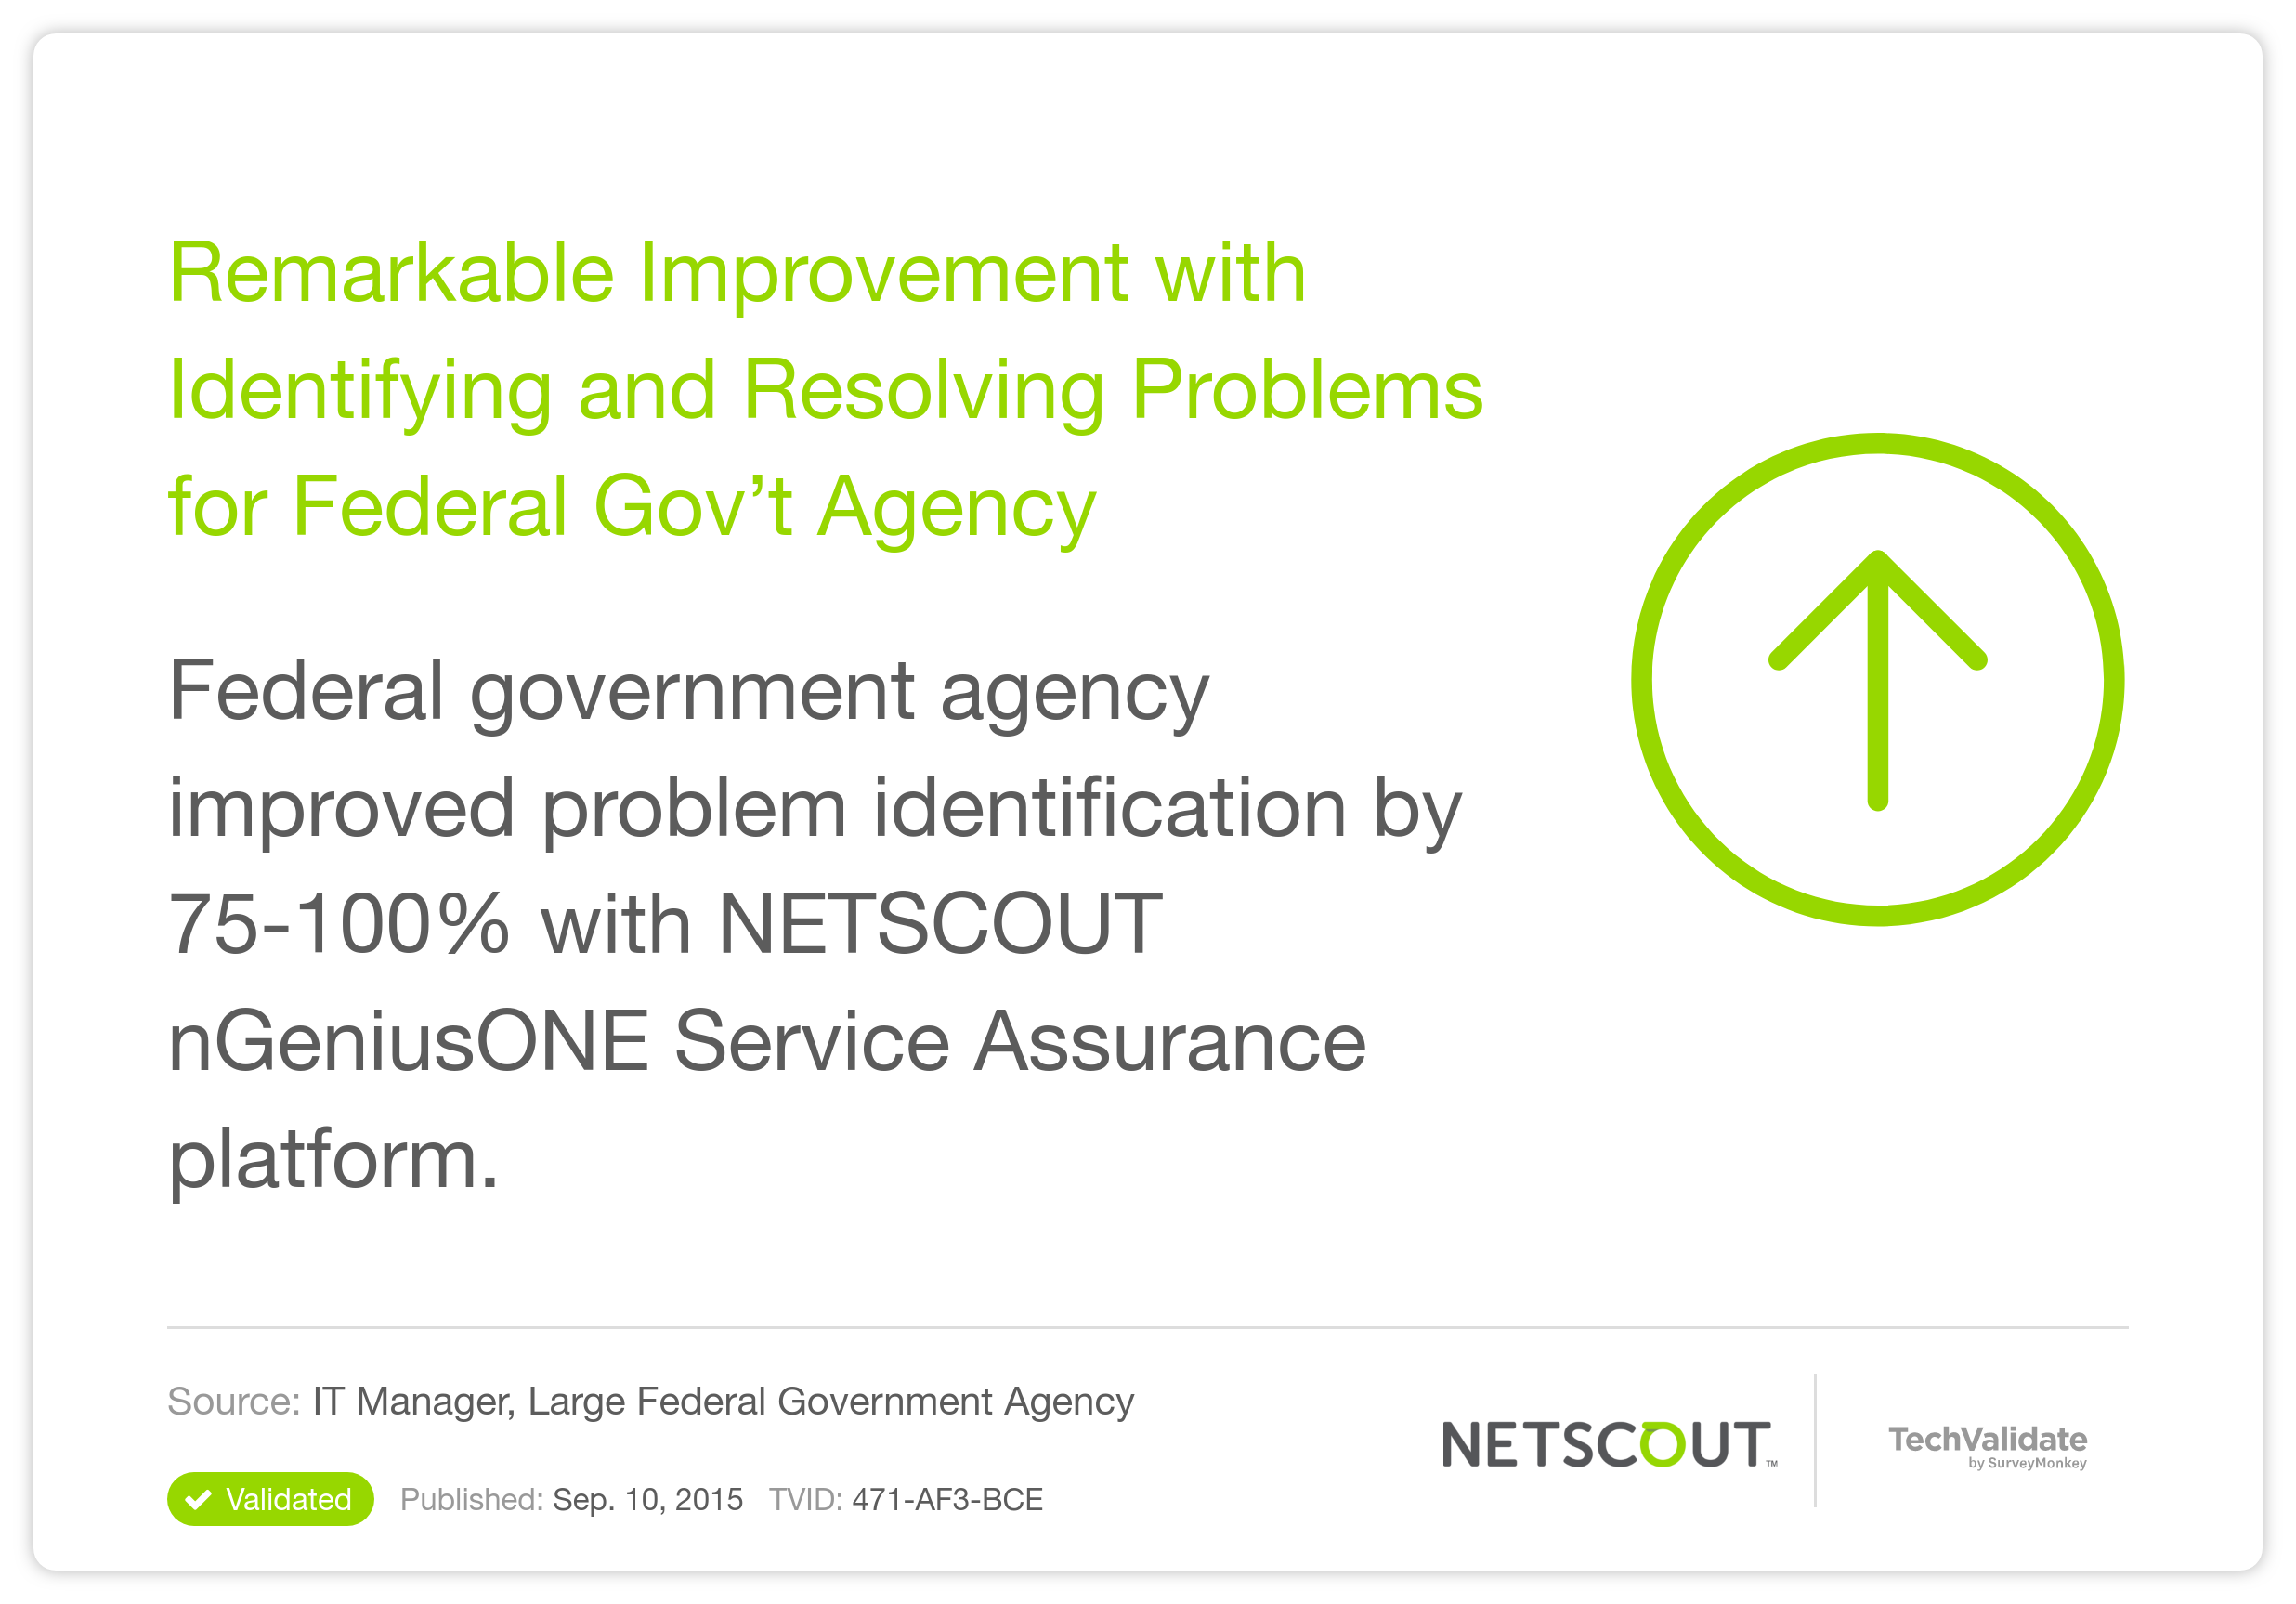 Remarkable Improvement with Identifying and Resolving Problems for Federal Gov't Agency